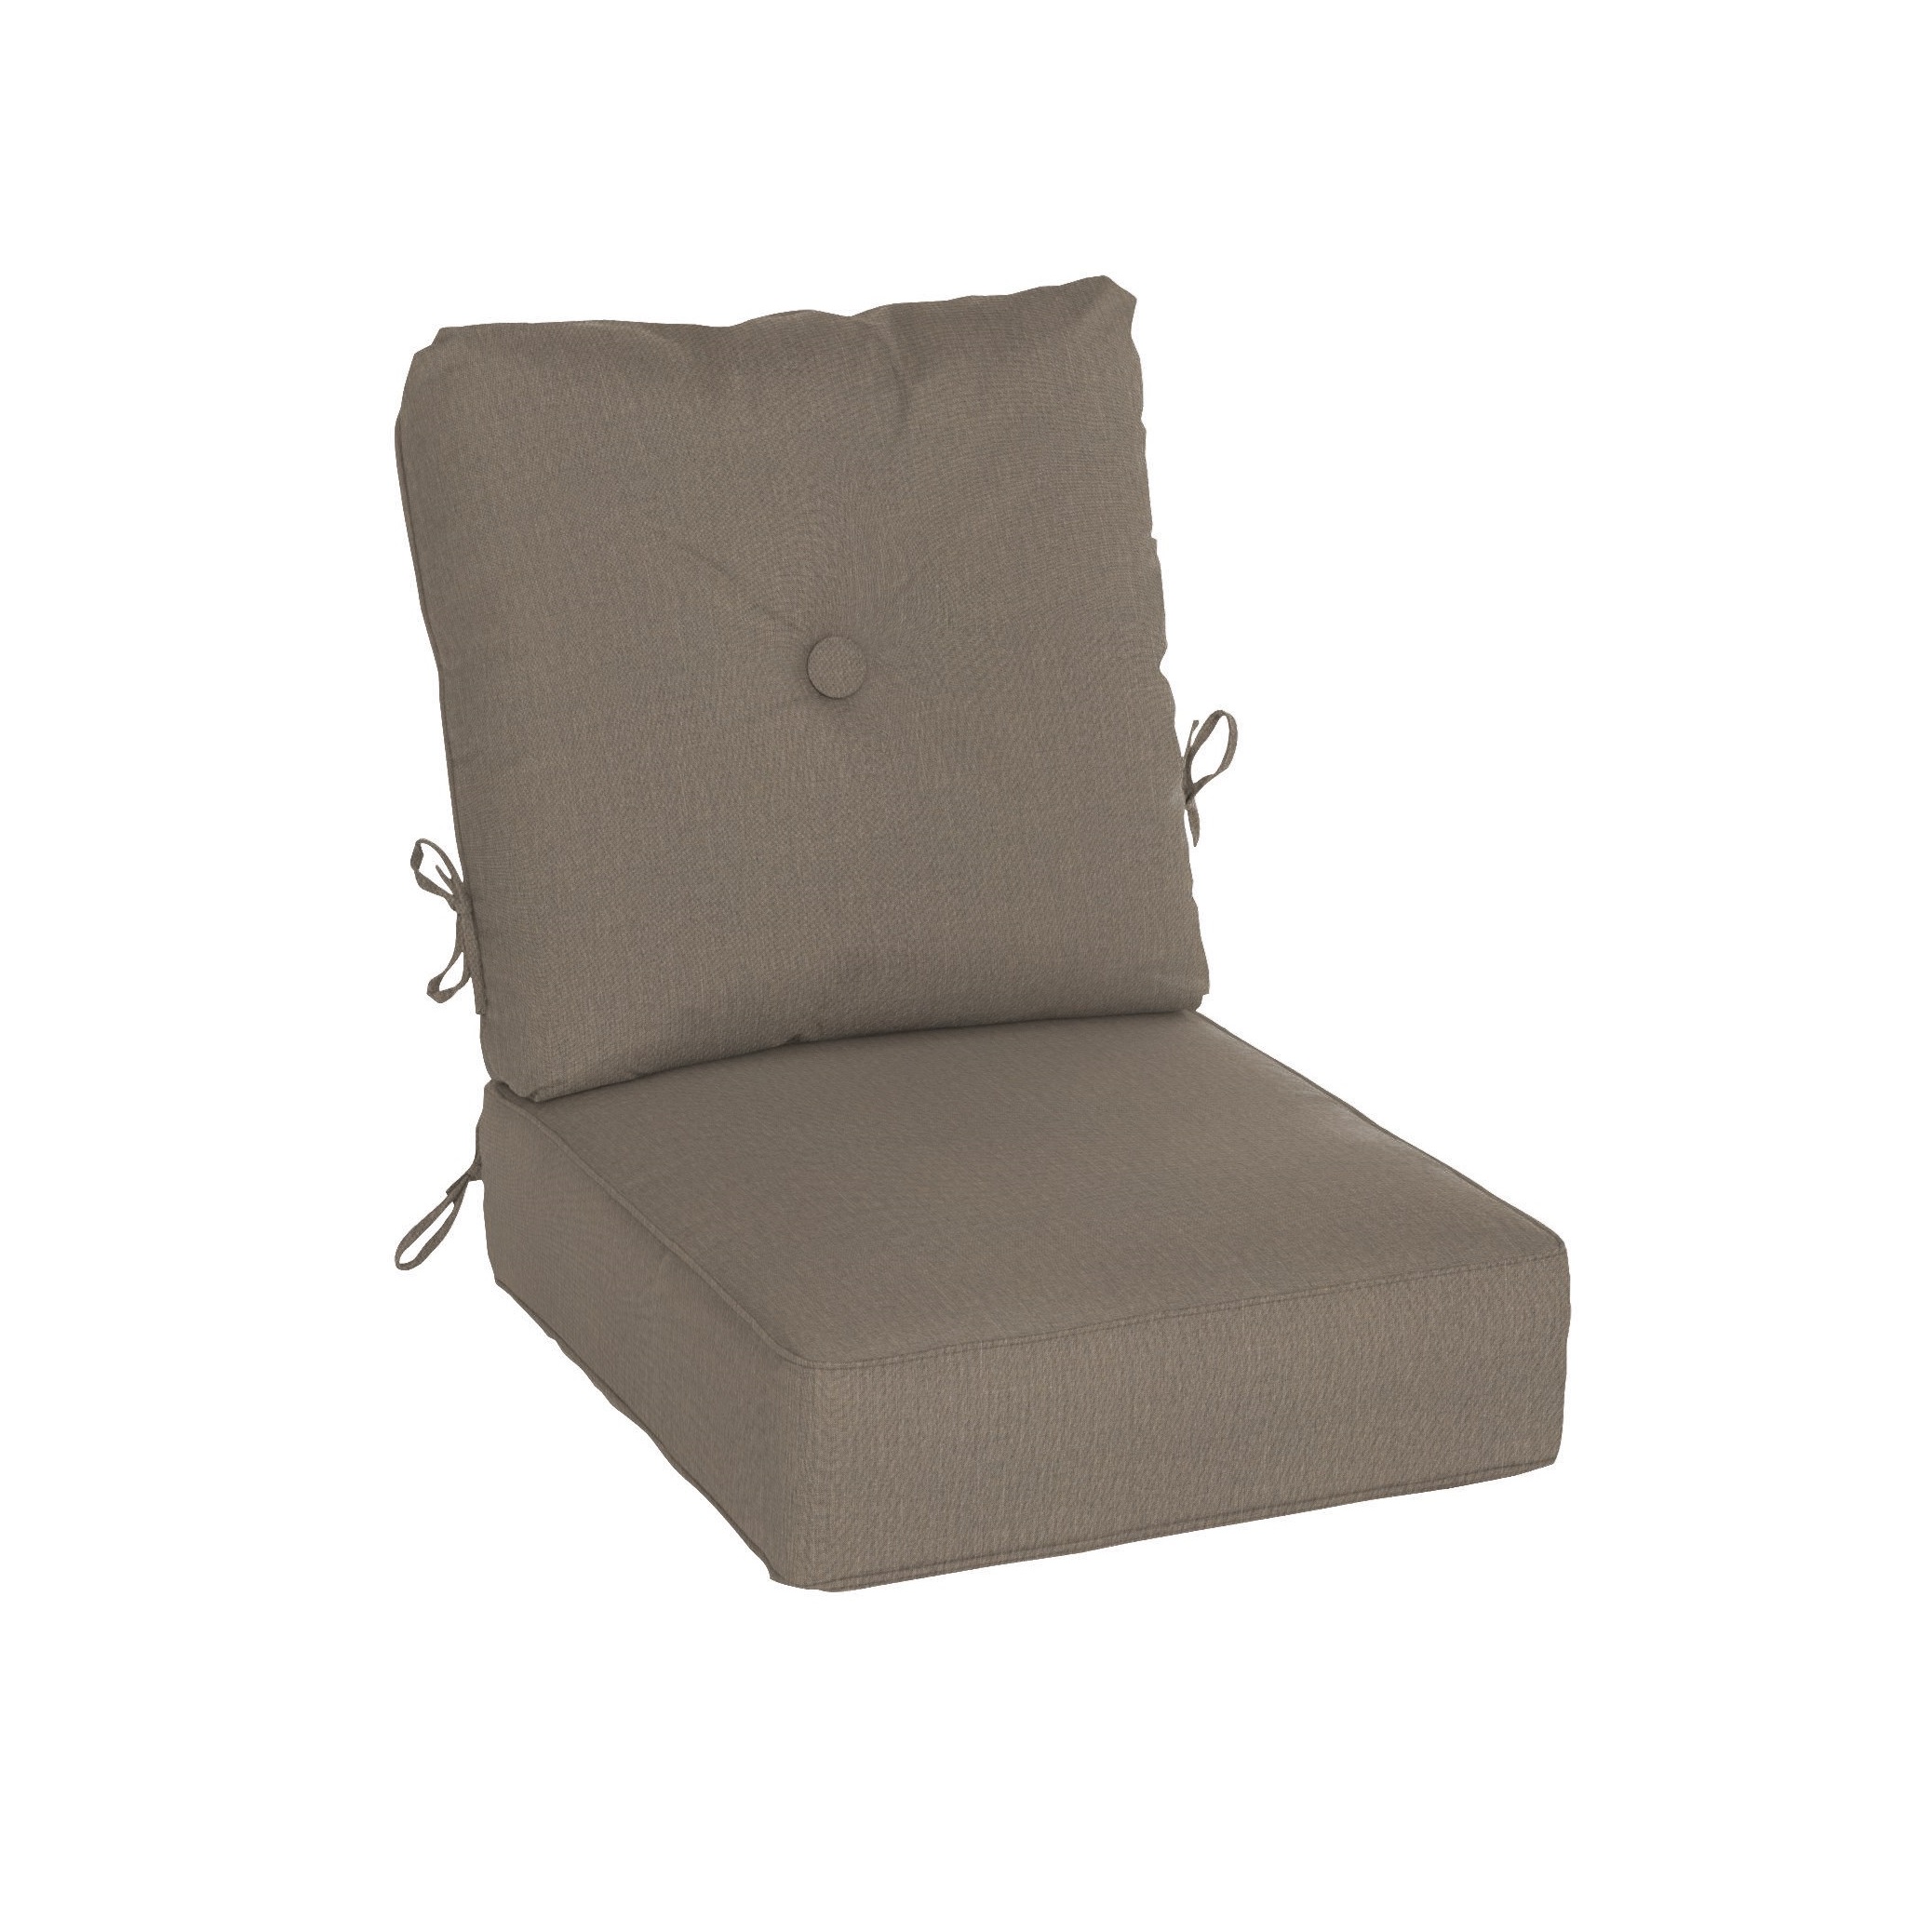 cast shale water resistant estate chair cushion product image